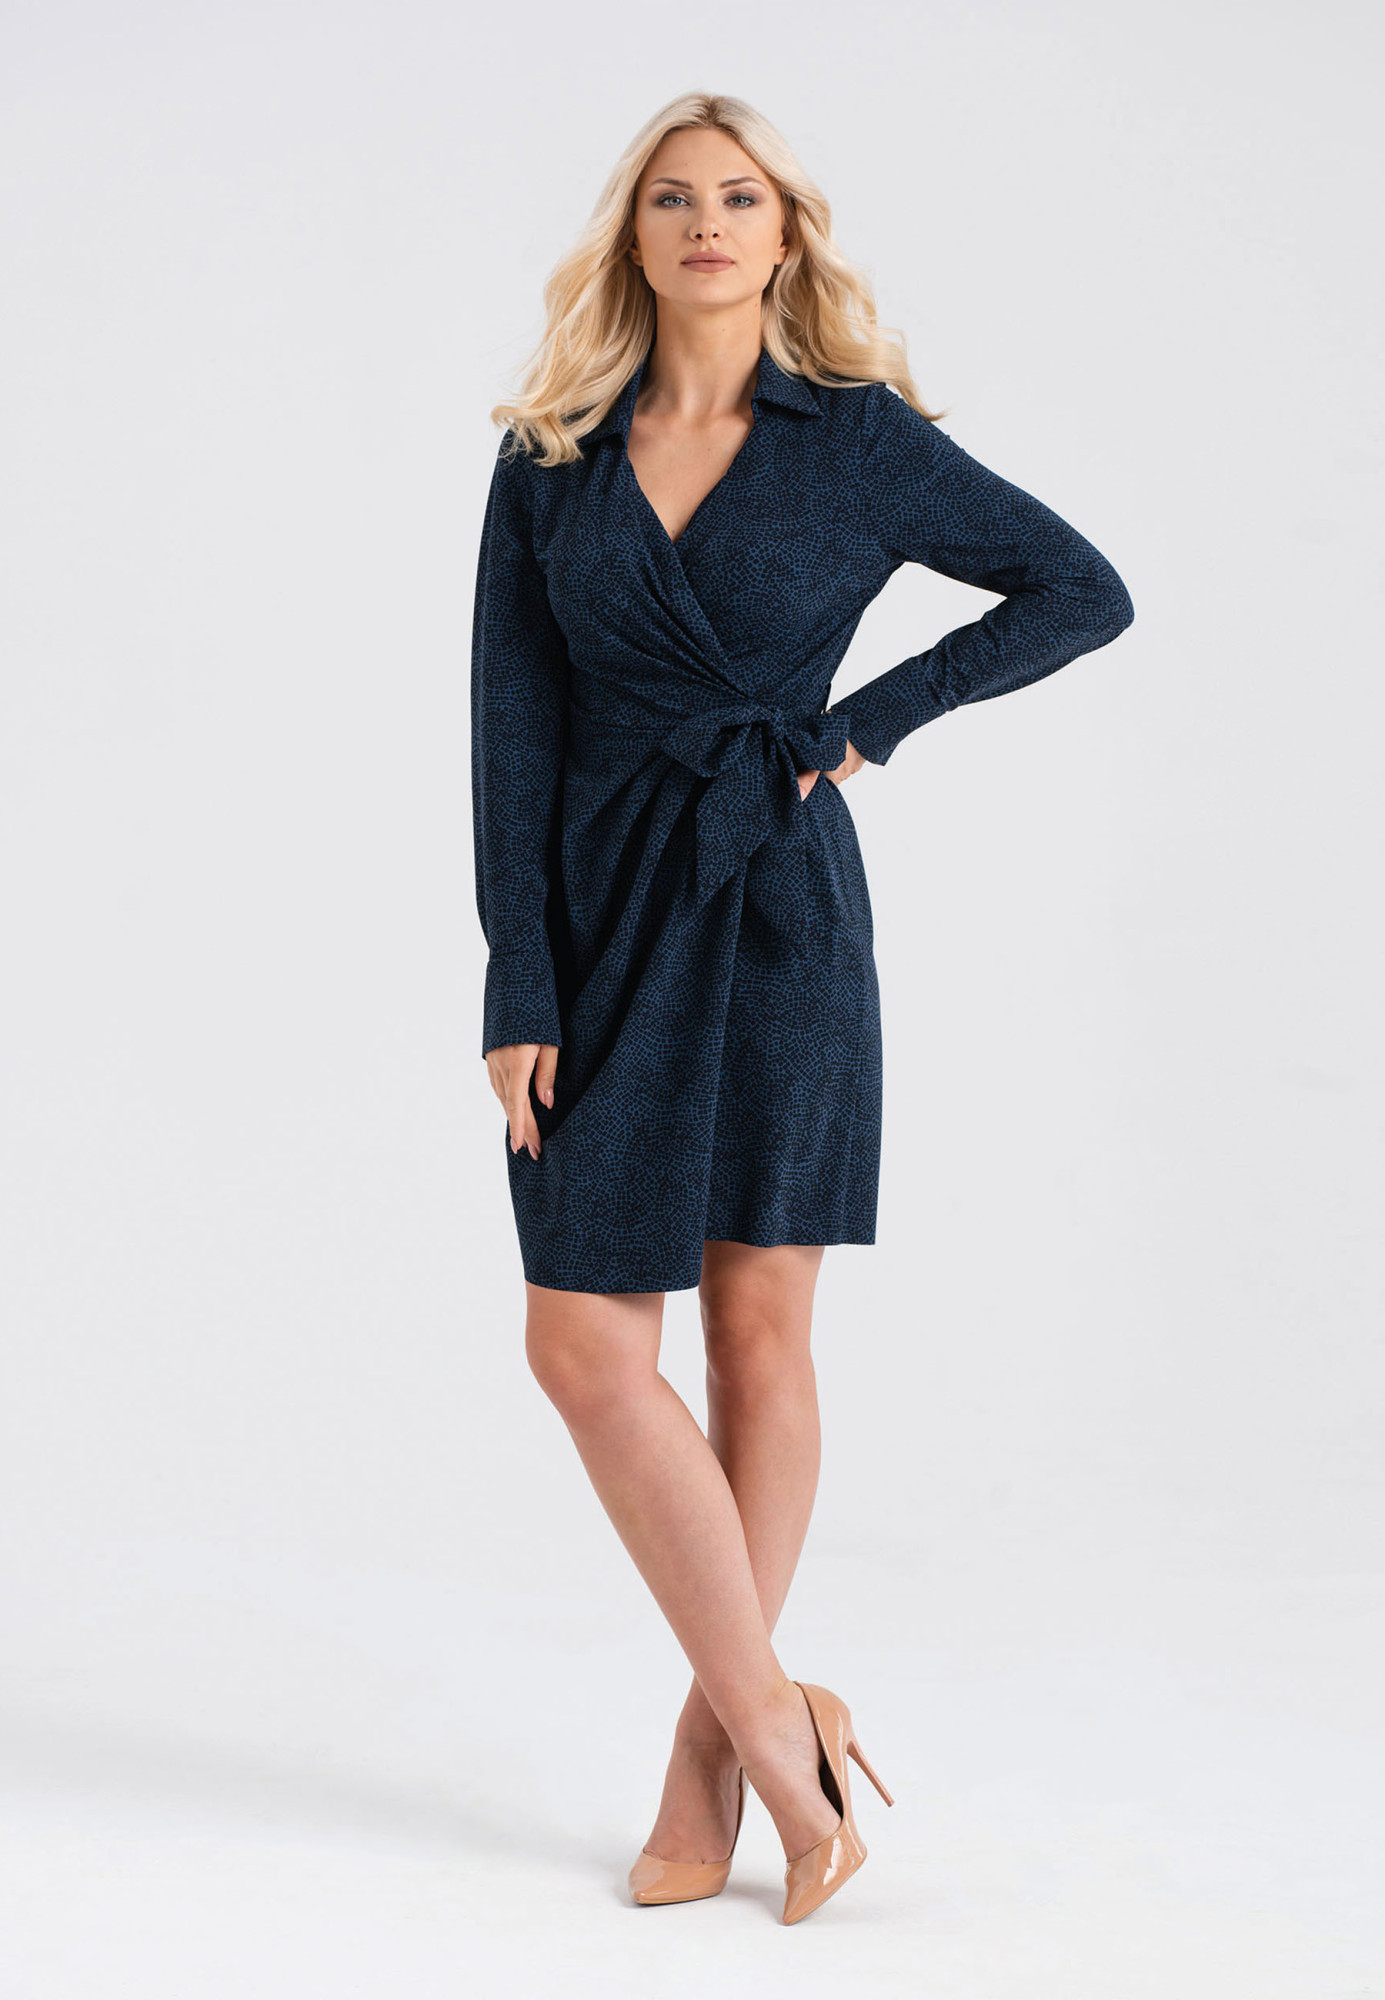 Look Made With Love Šaty 743 Beatrice Navy Blue S